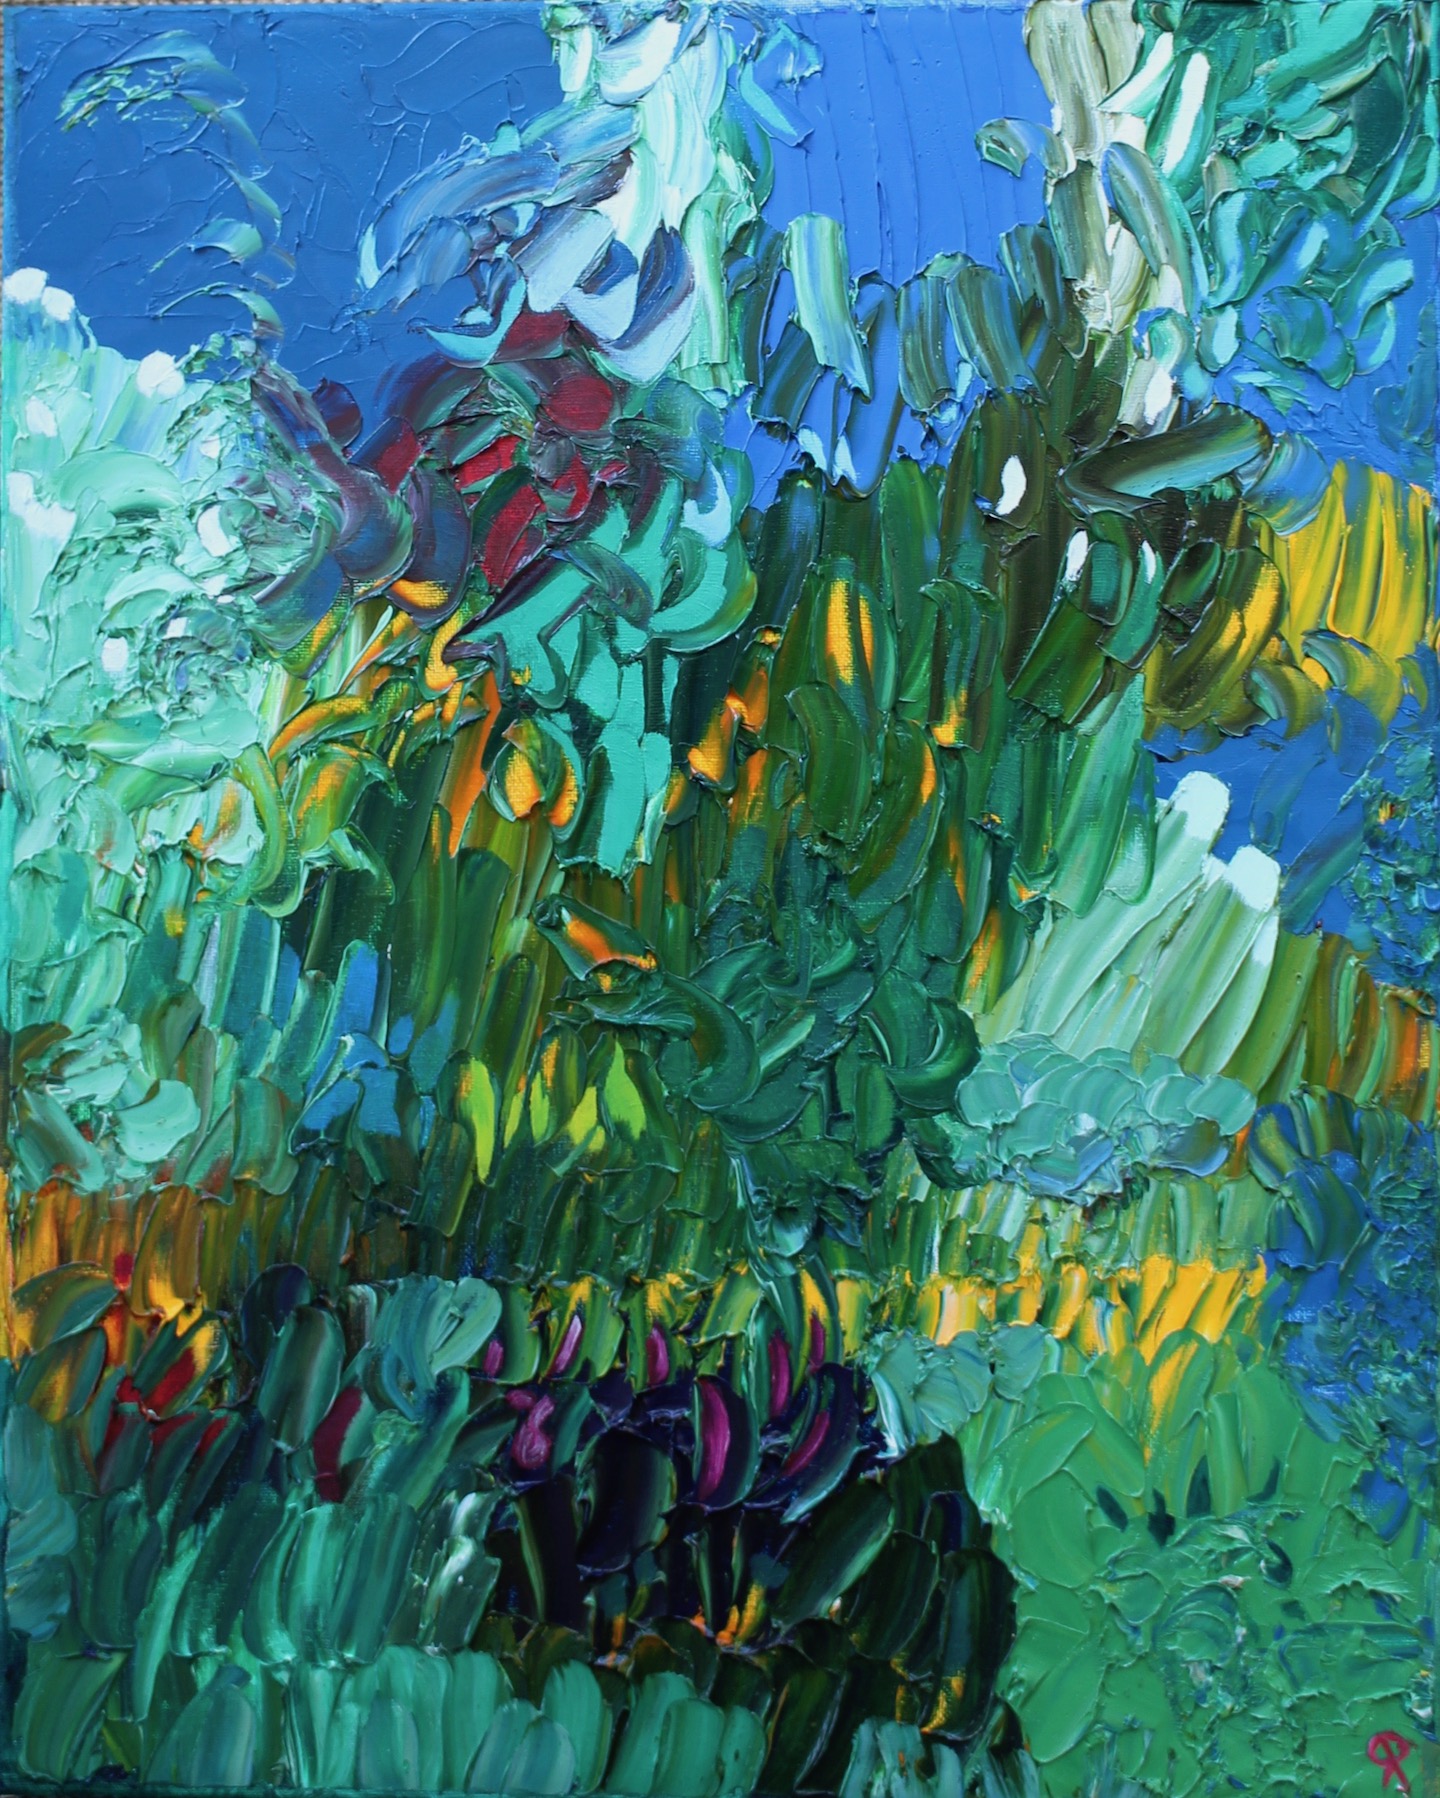 The Paletteable Garden 4, Russell Steven Powell oil on canvas, 16x20